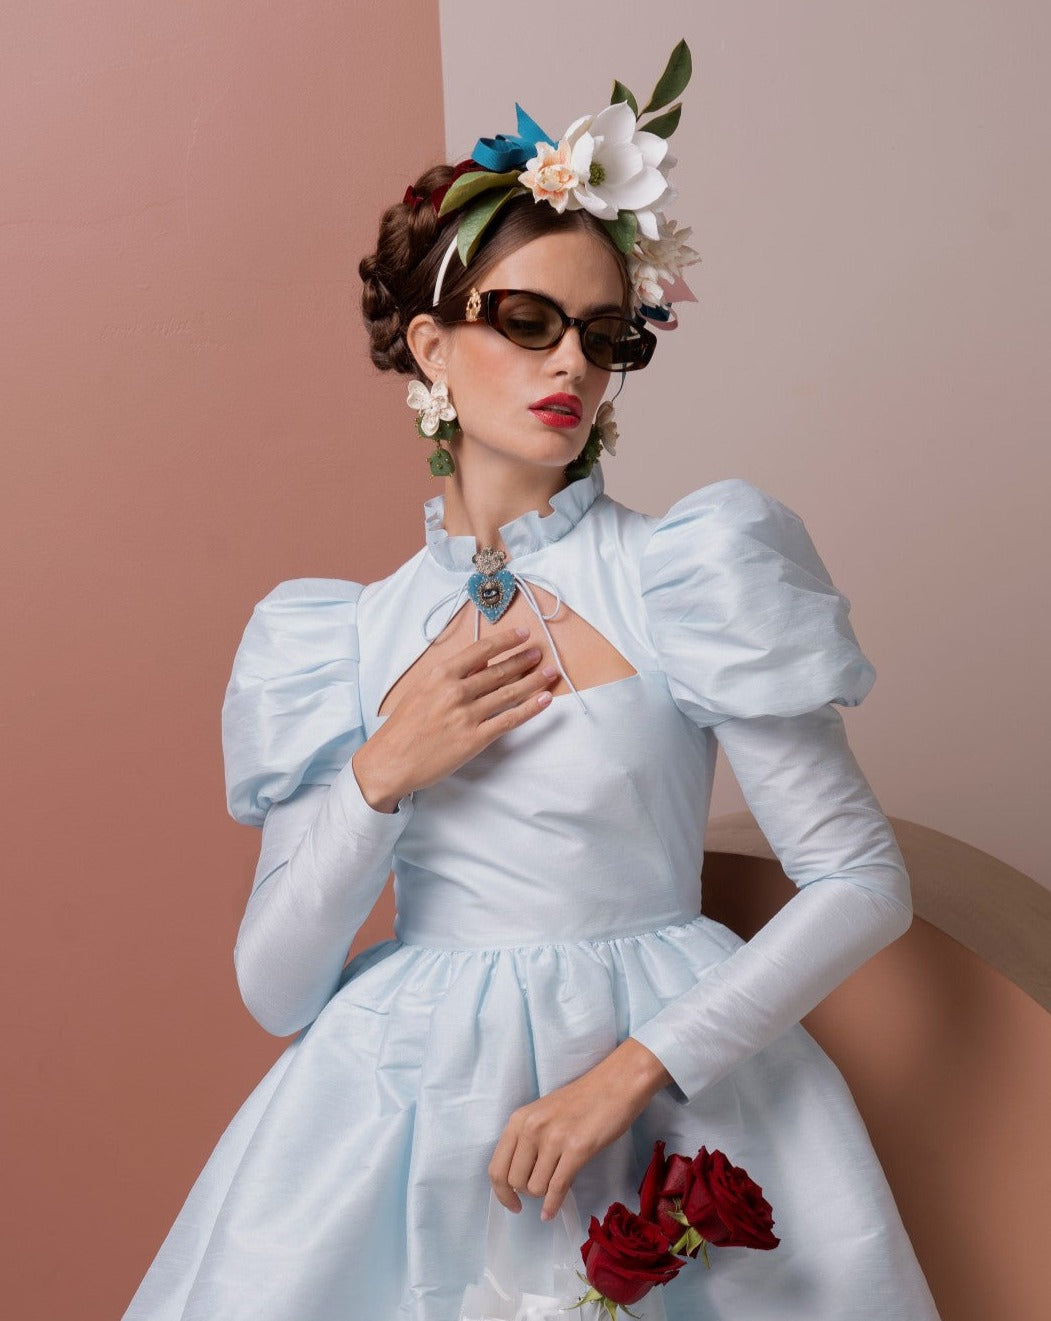 A woman dressed in a light blue vintage-style dress with puffed sleeves poses against a color-blocked background. She wears floral headgear, ultra-lightweight For Art&#39;s Sake® Frida Portrait sunglasses with 100% UVA &amp; UVB protection, drop earrings, and holds red roses in one hand while touching her chest with the other.